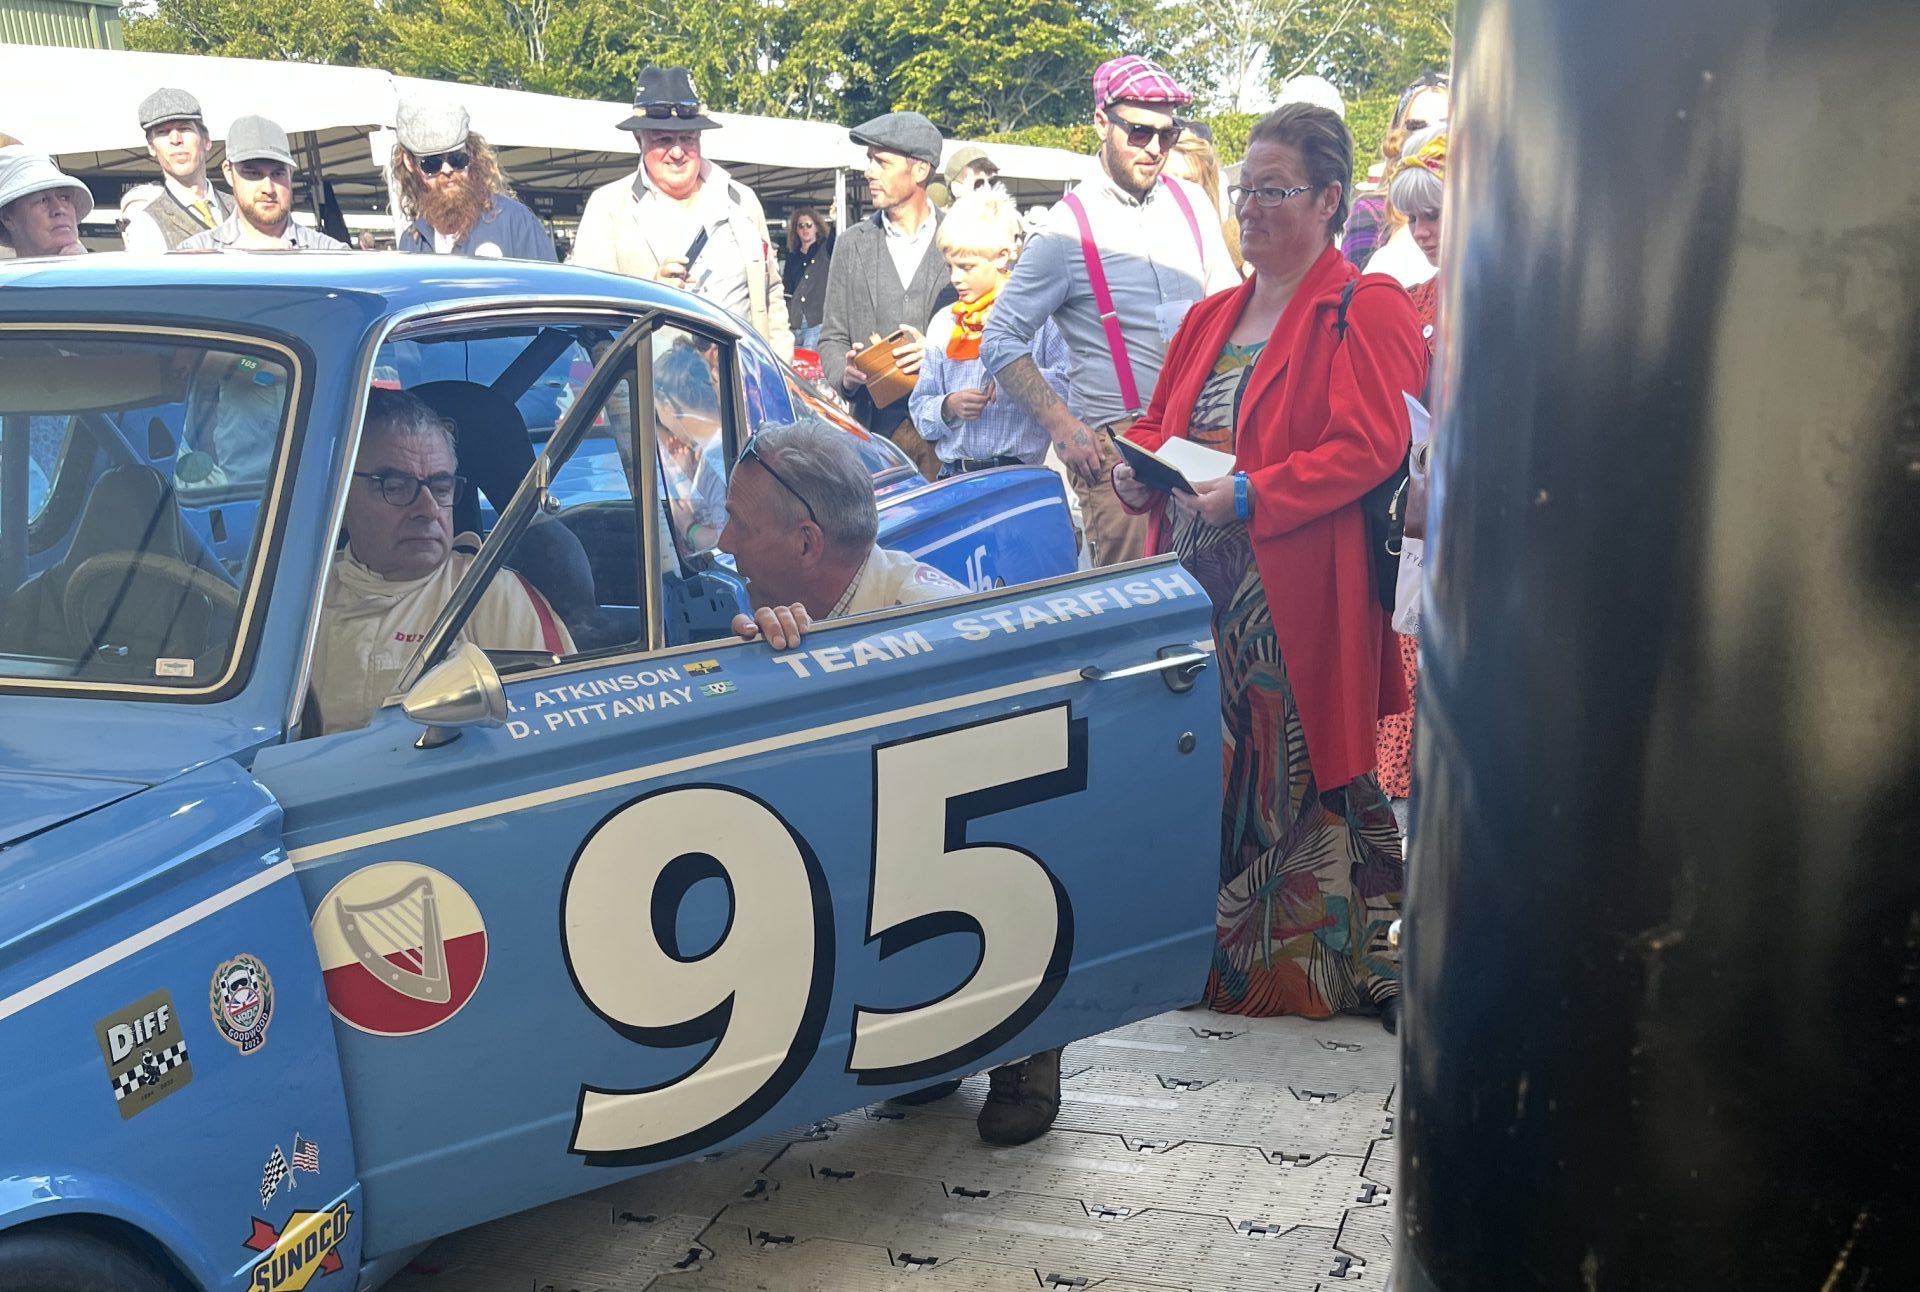 I worked on Mr. Bean’s Plymouth Barracuda brakes at the Goodwood Revival (and he didn’t die)